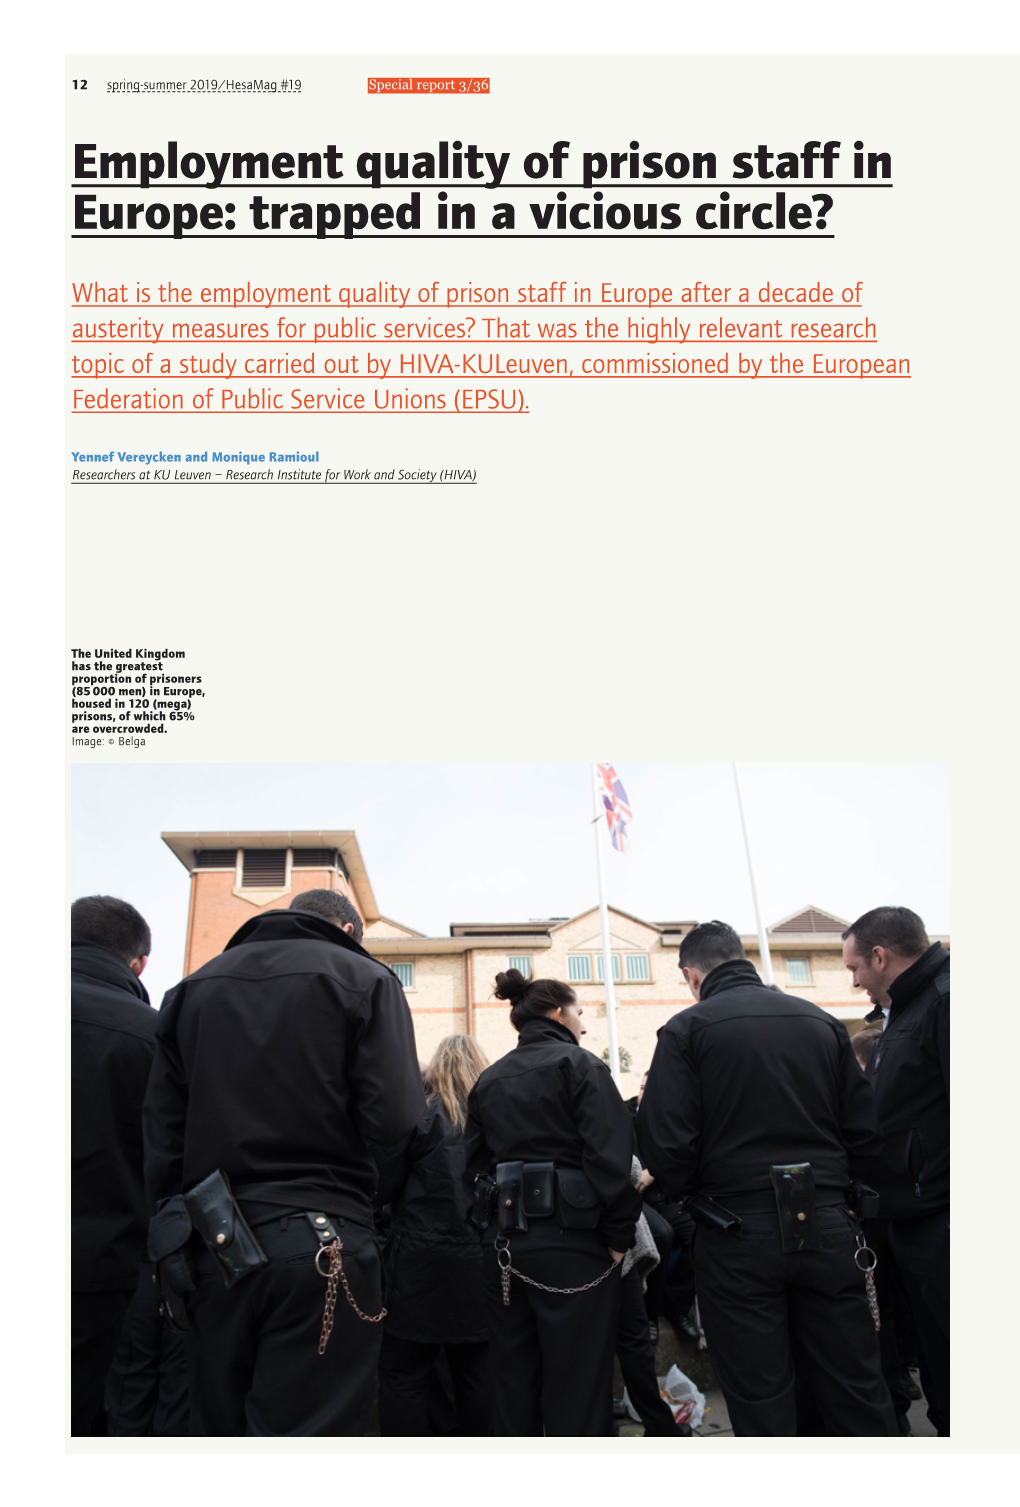 Employment Quality of Prison Staff in Europe: Trapped in a Vicious Circle?